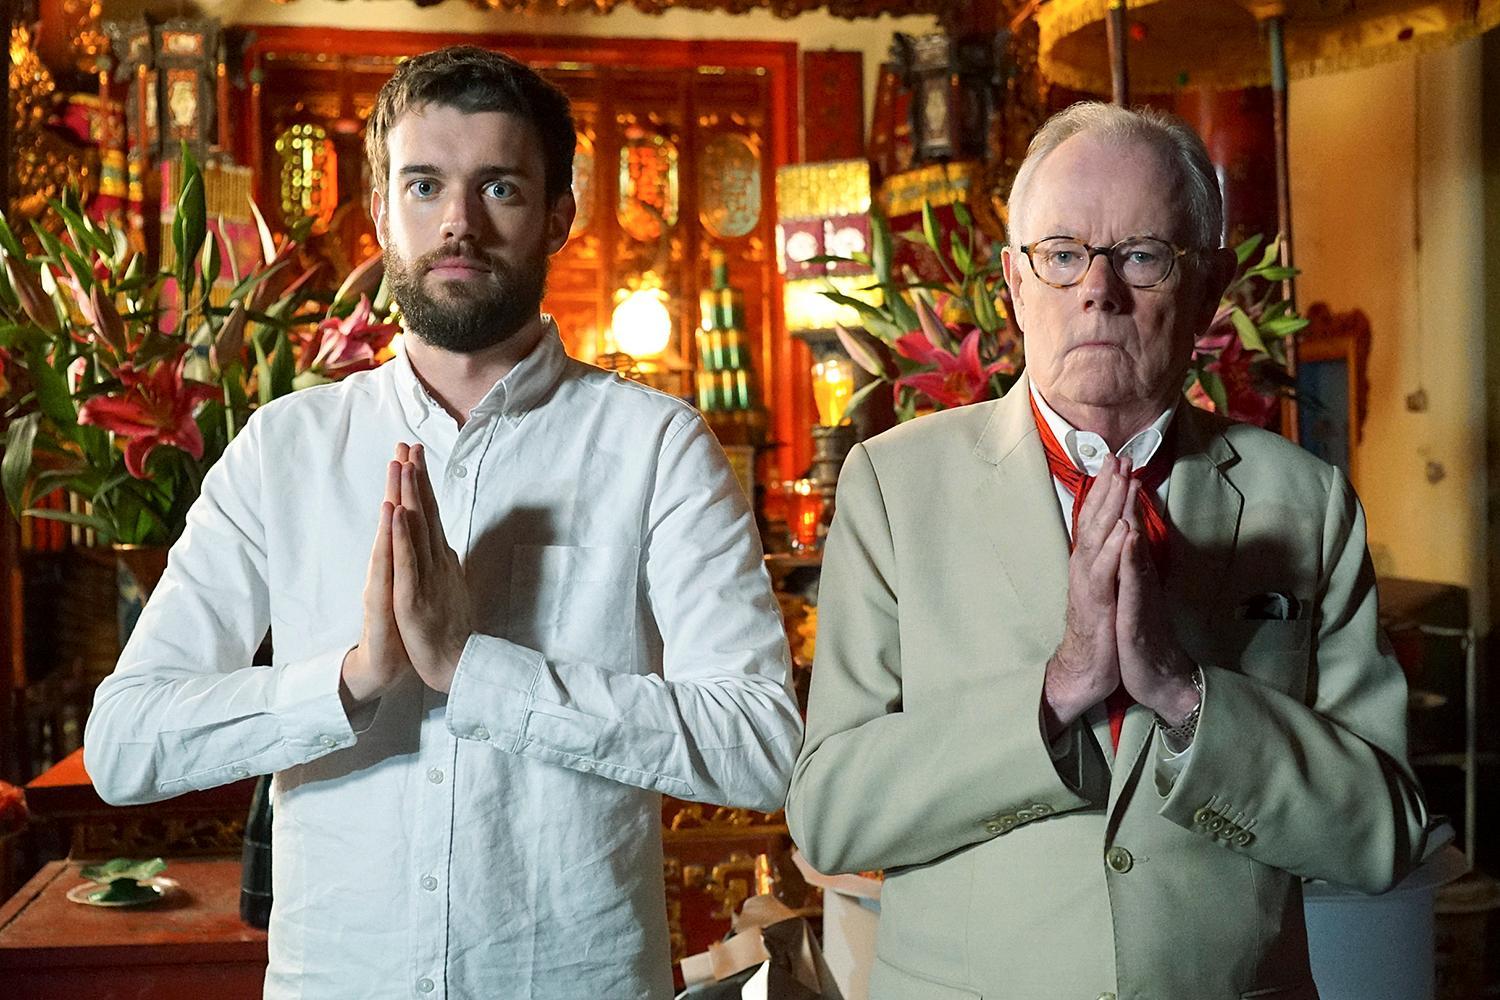 Jack Whitehall: Travels With My Father Season 5